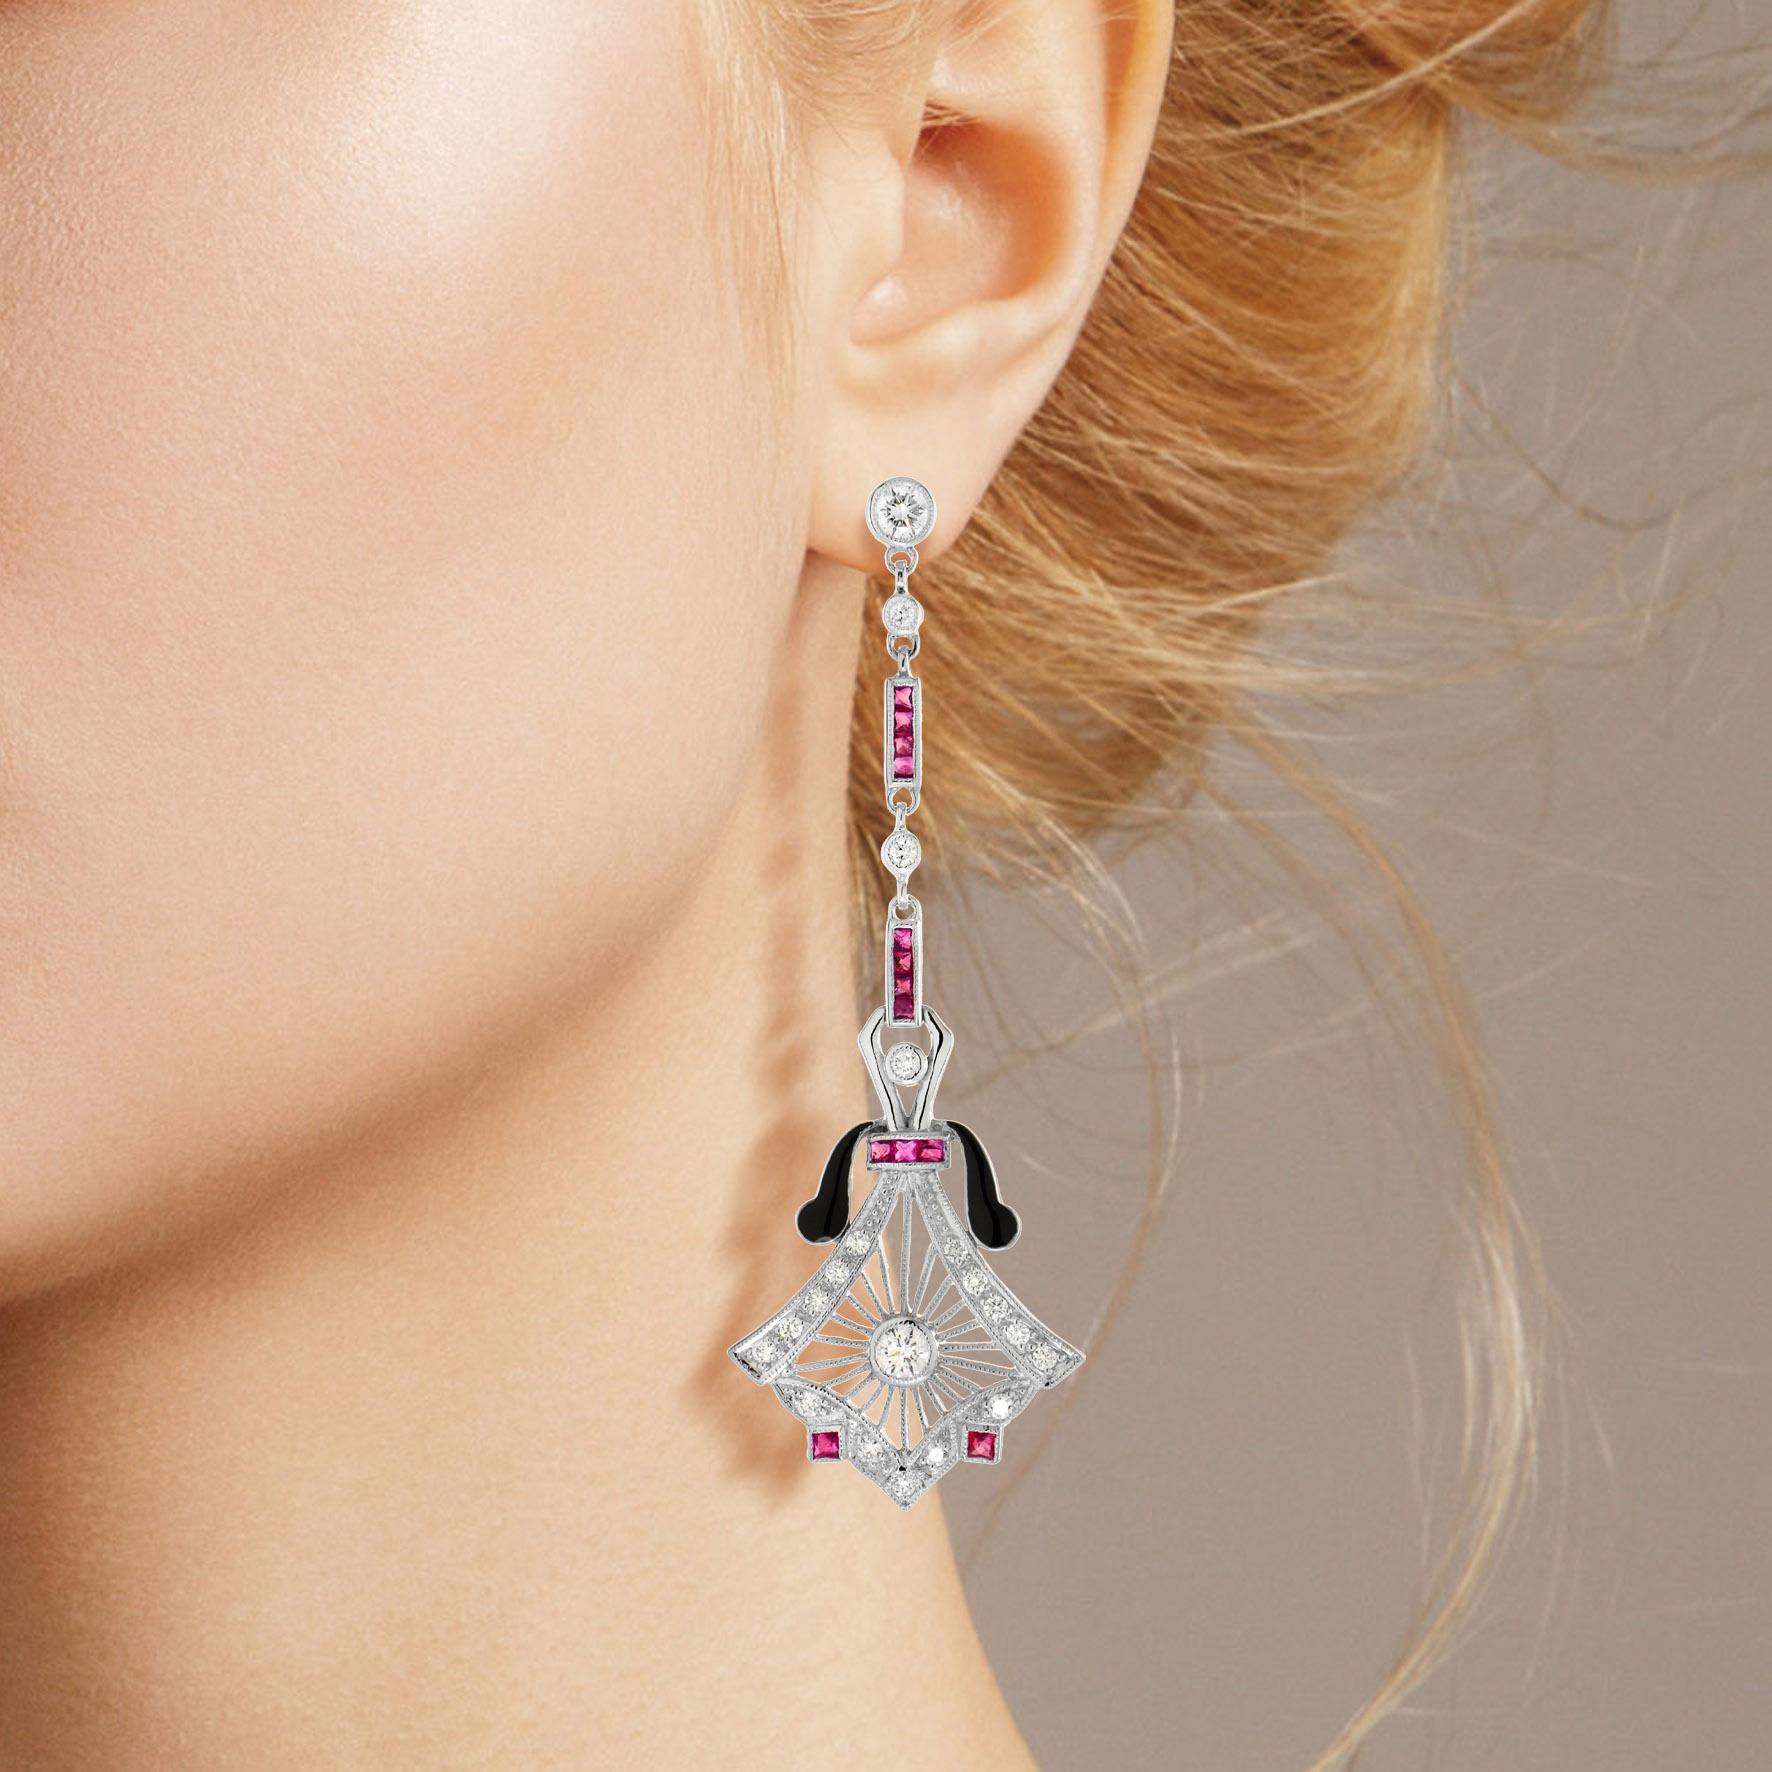 These antique dangle drop earrings are one of the most whimsical pieces of jewelry. When worn, the black enamel forms a beautiful contrast, which makes the diamonds and ruby stand out even more. Set in 14K white gold, these Art-Deco style earrings